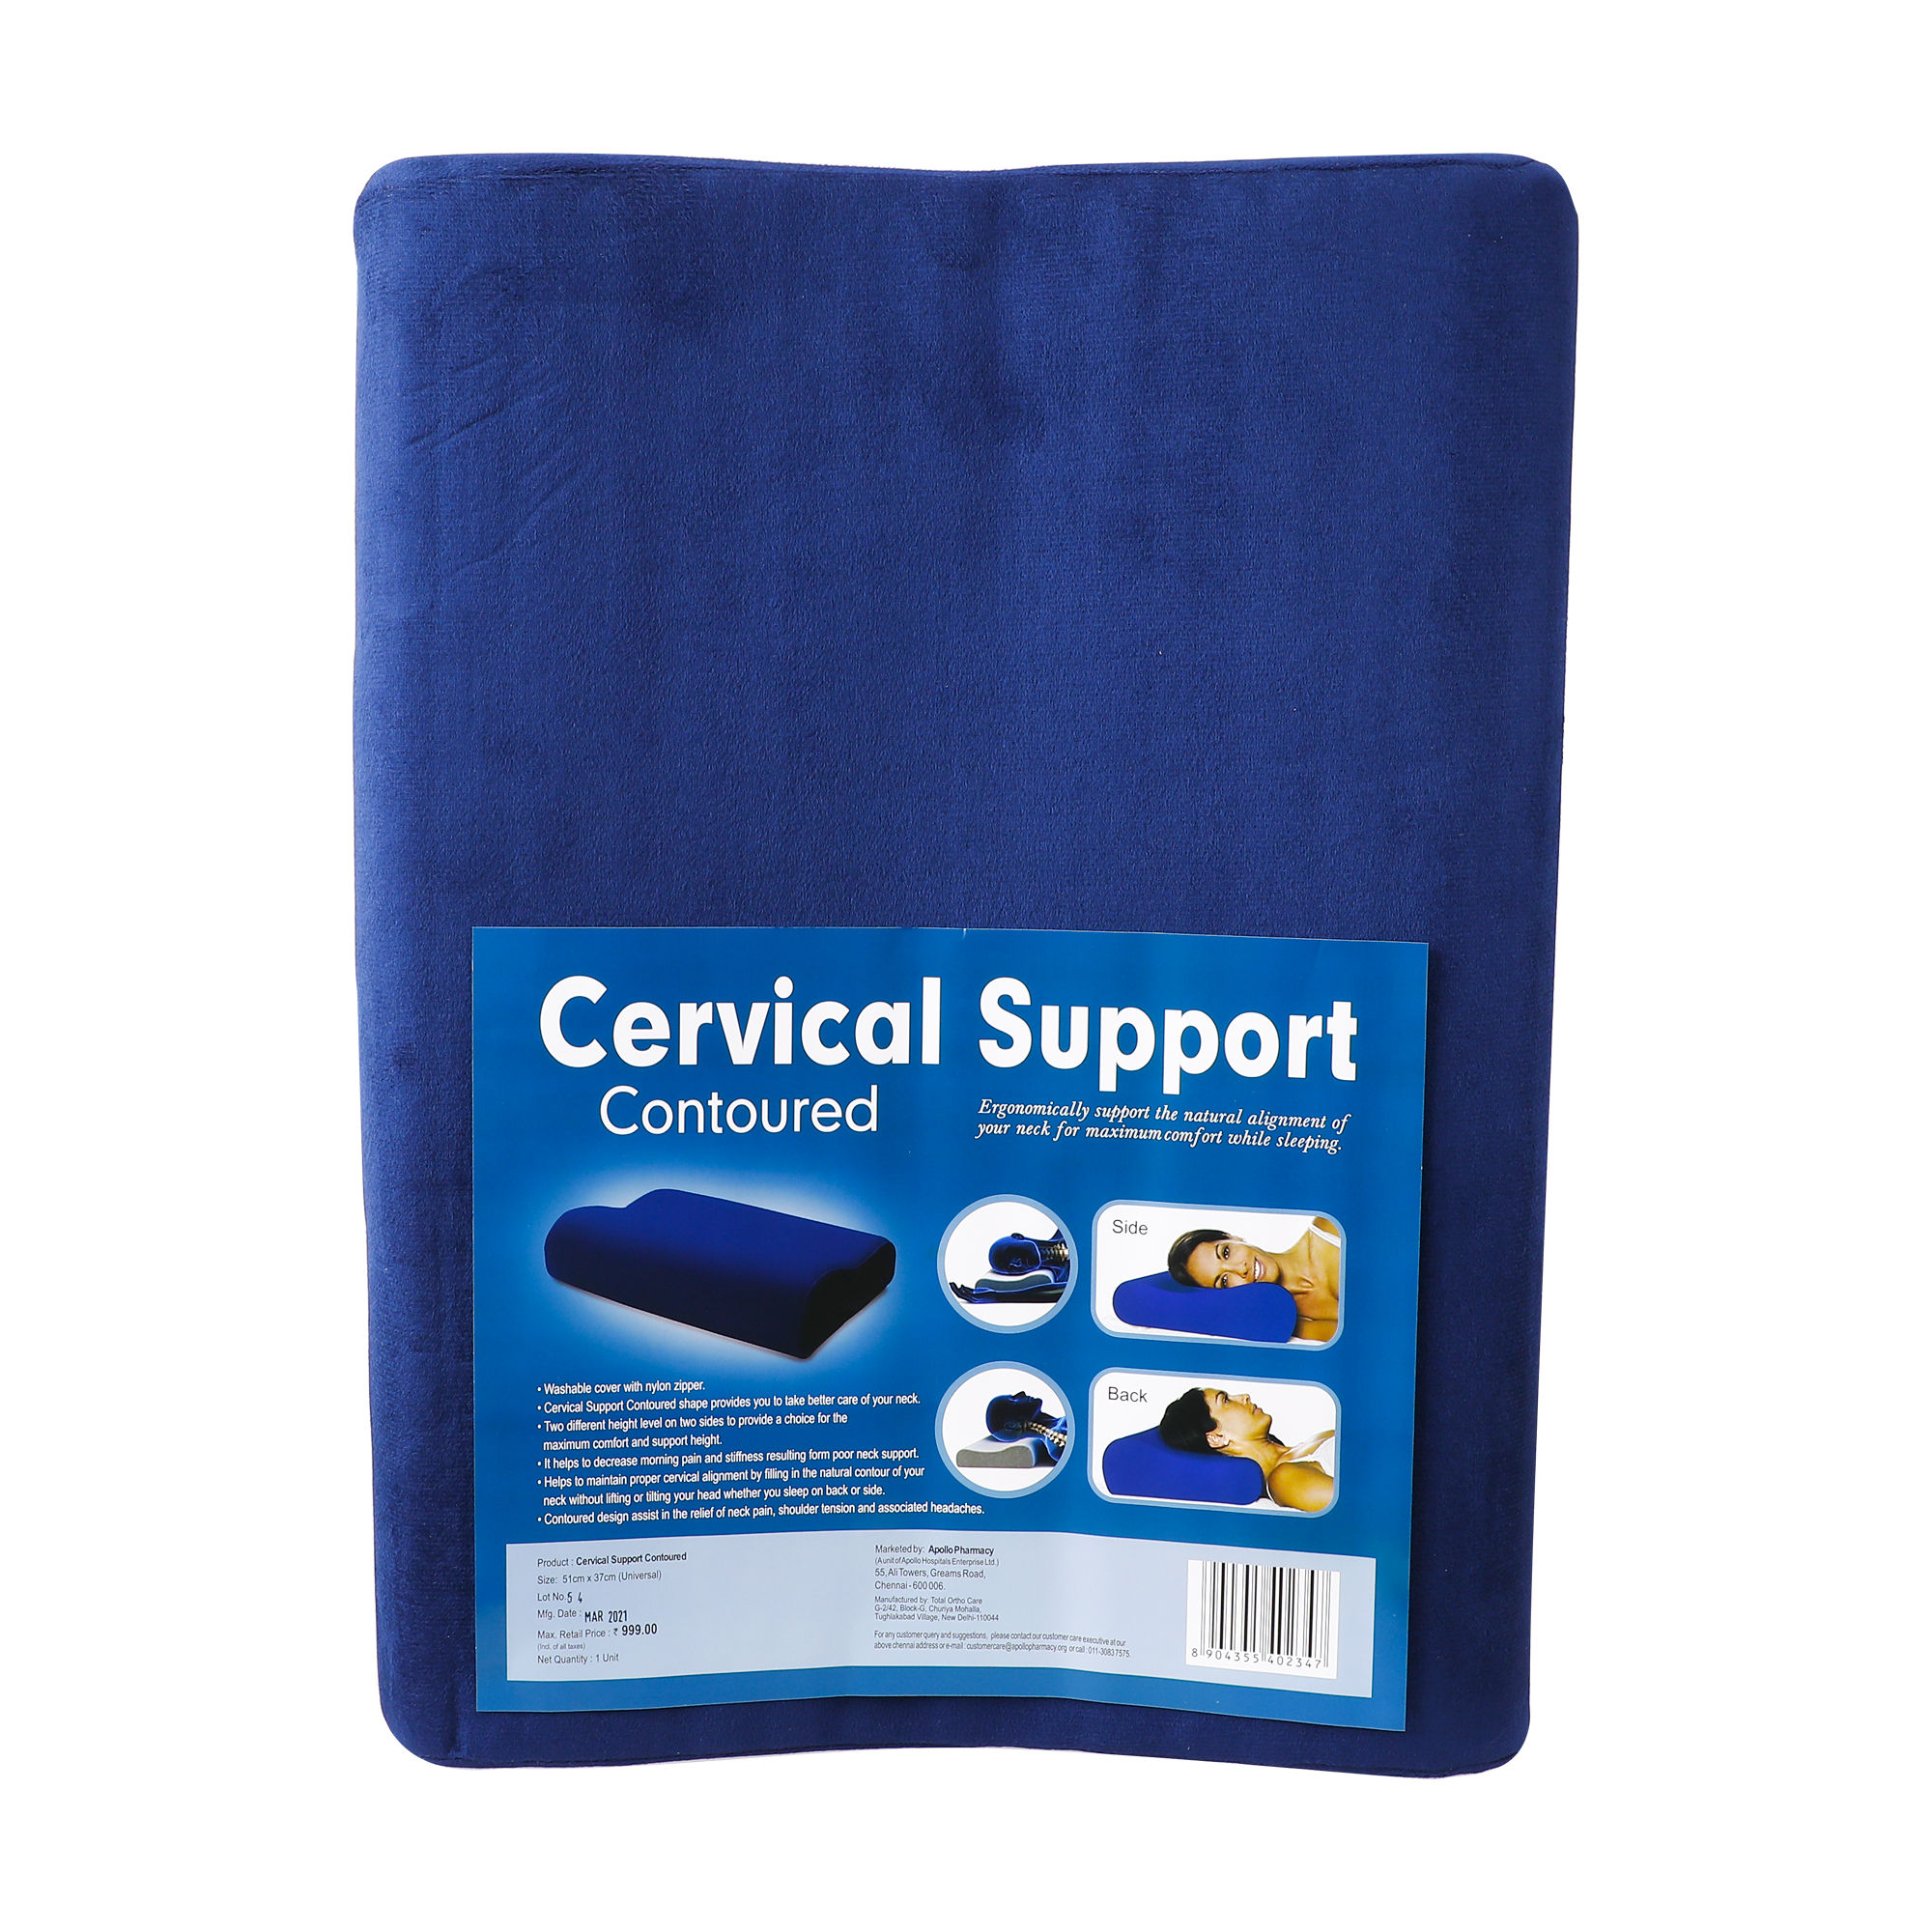 Apollo Pharmacy Cervical Support, 1 Count, Pack of 1 